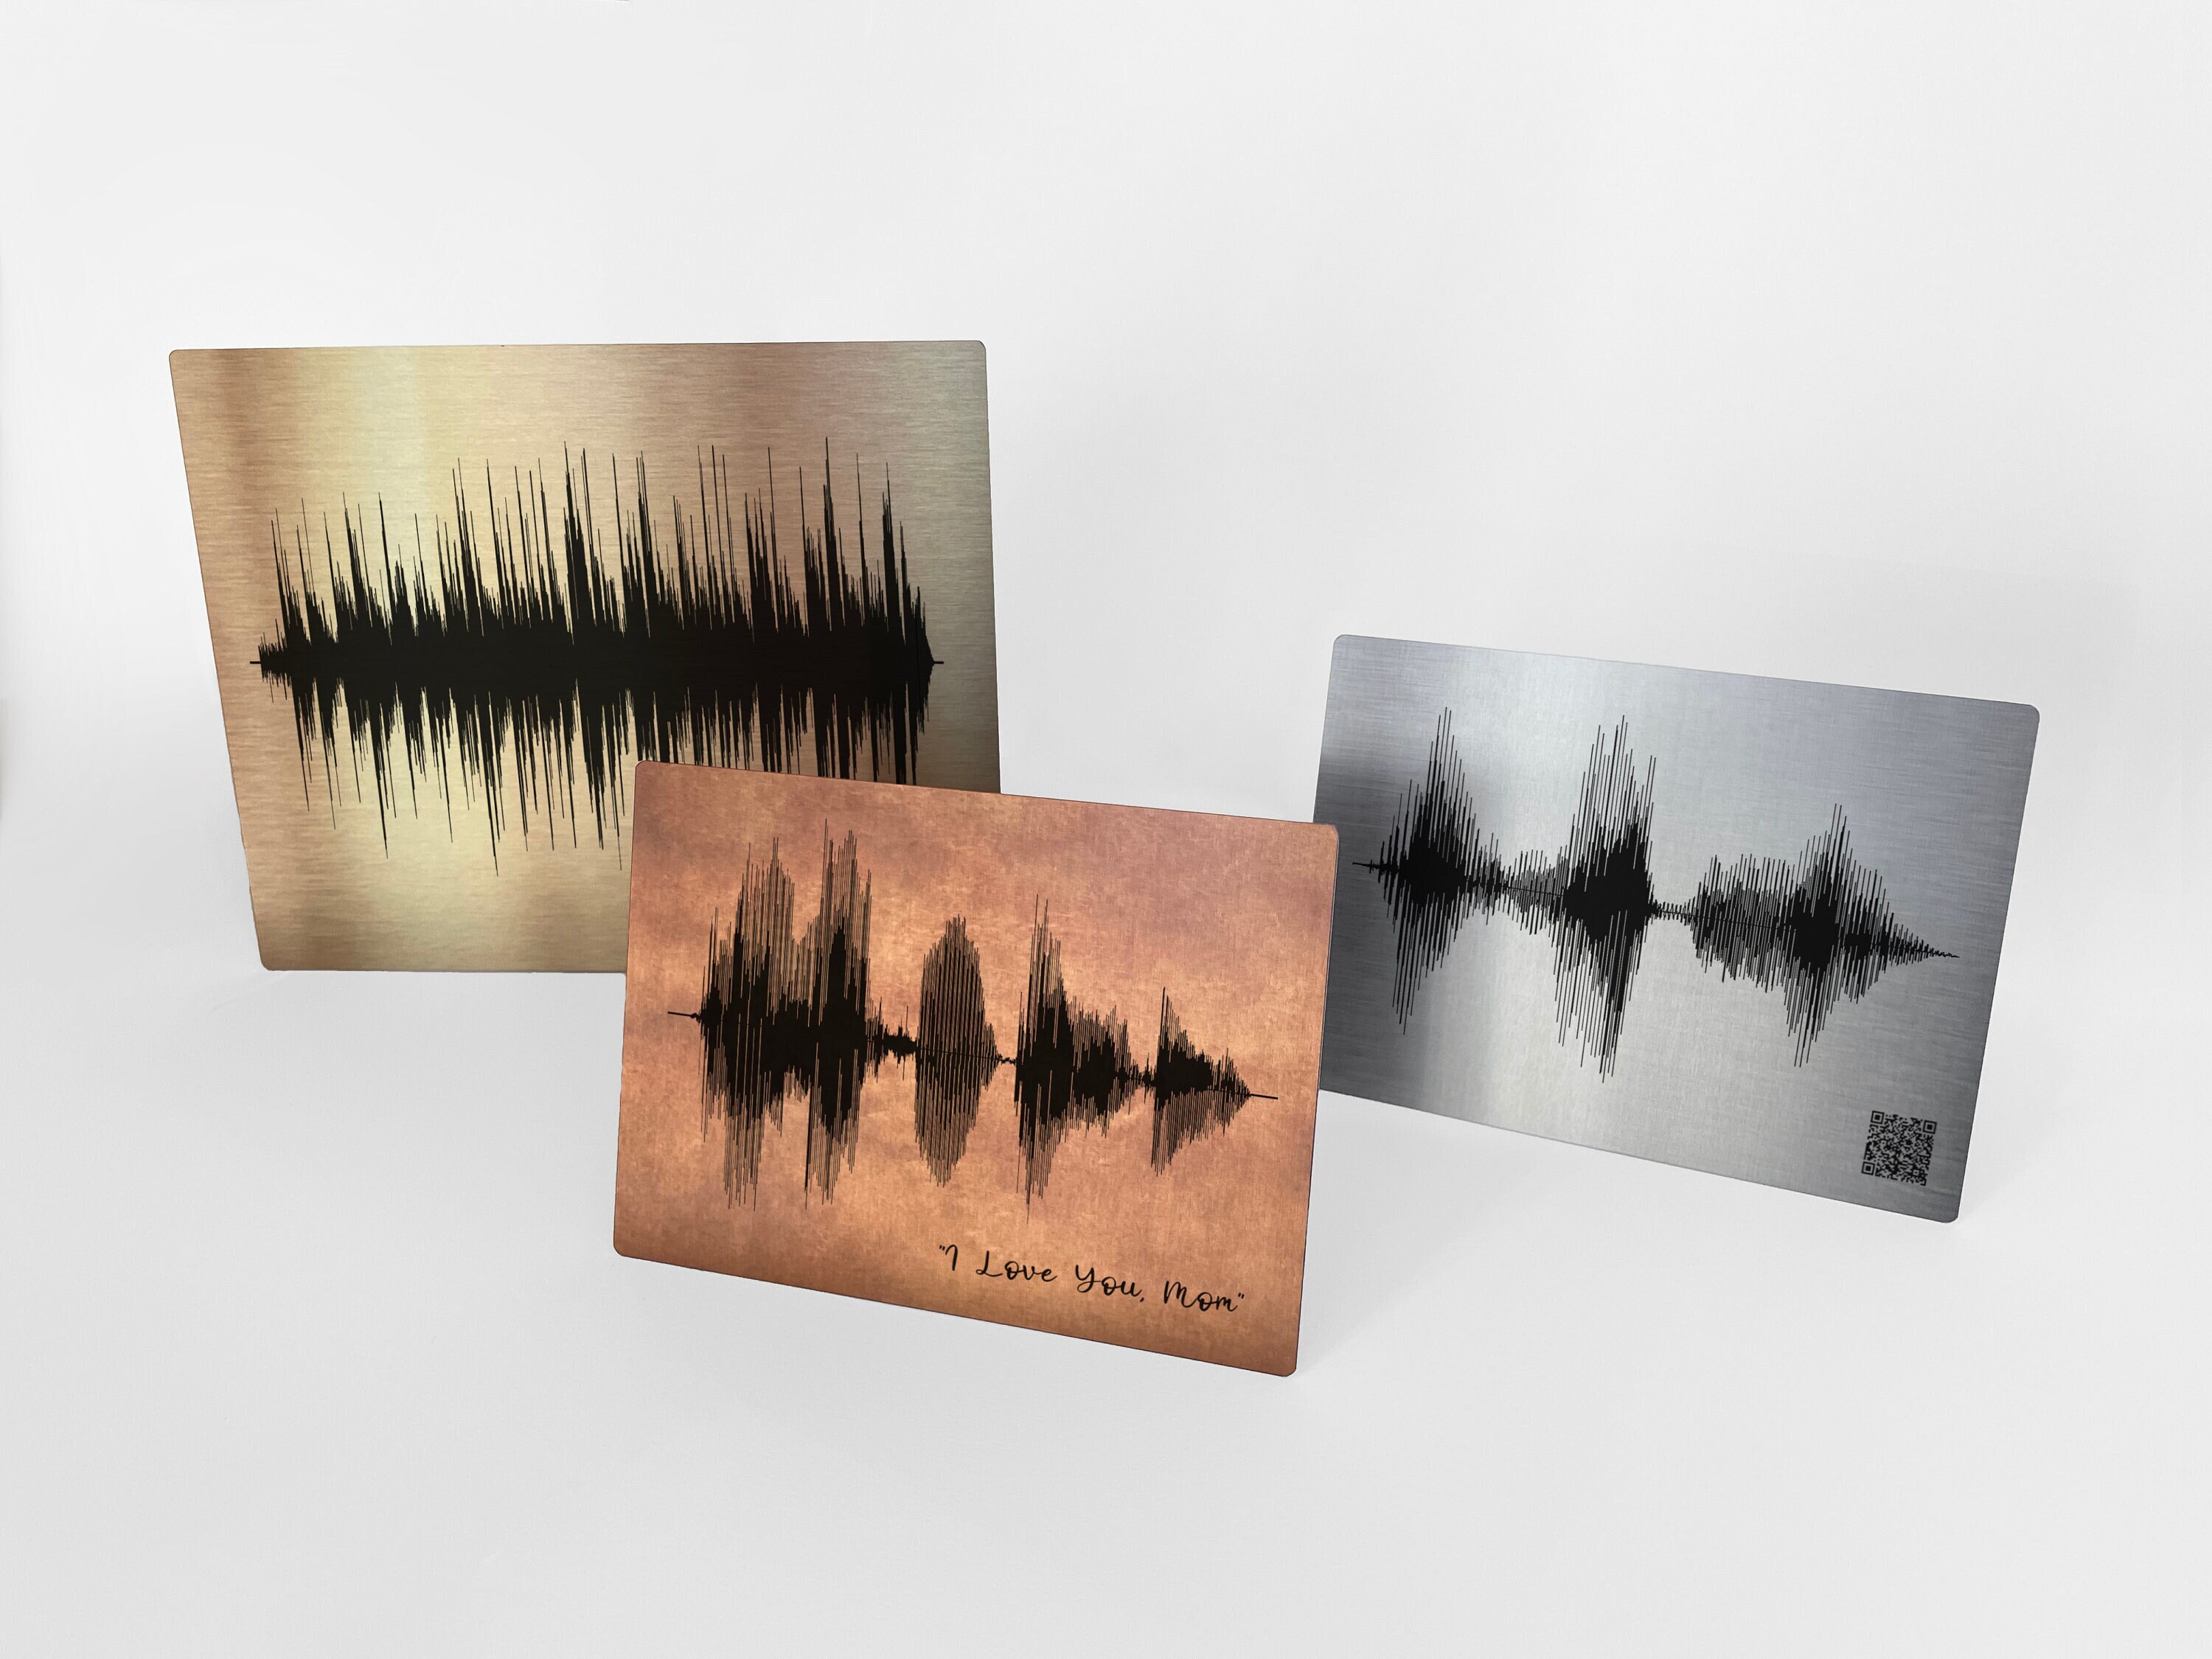 Sound Wave Art, Aluminum Metal,10th Anniversary, 10 Year Anniversary Gifts  for Him, Tin Anniversary Gift for Her, Personalized Voiceprint 